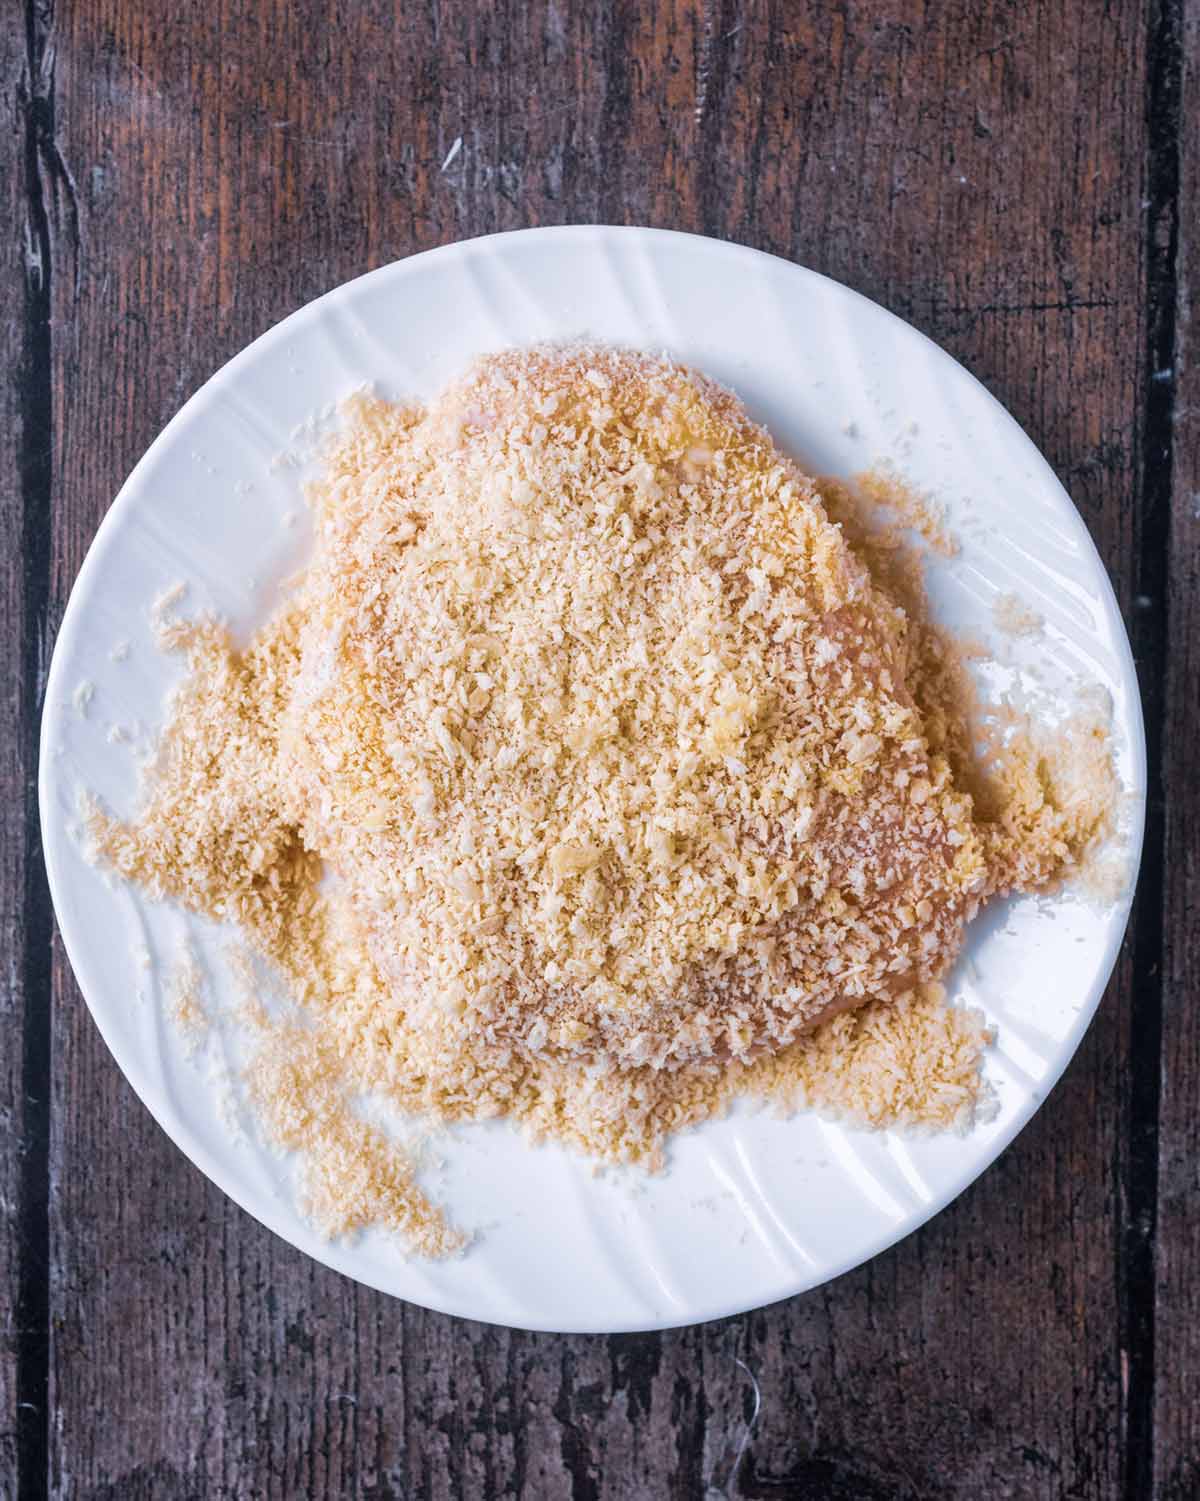 Breaded uncooked chicken breast on a plate.